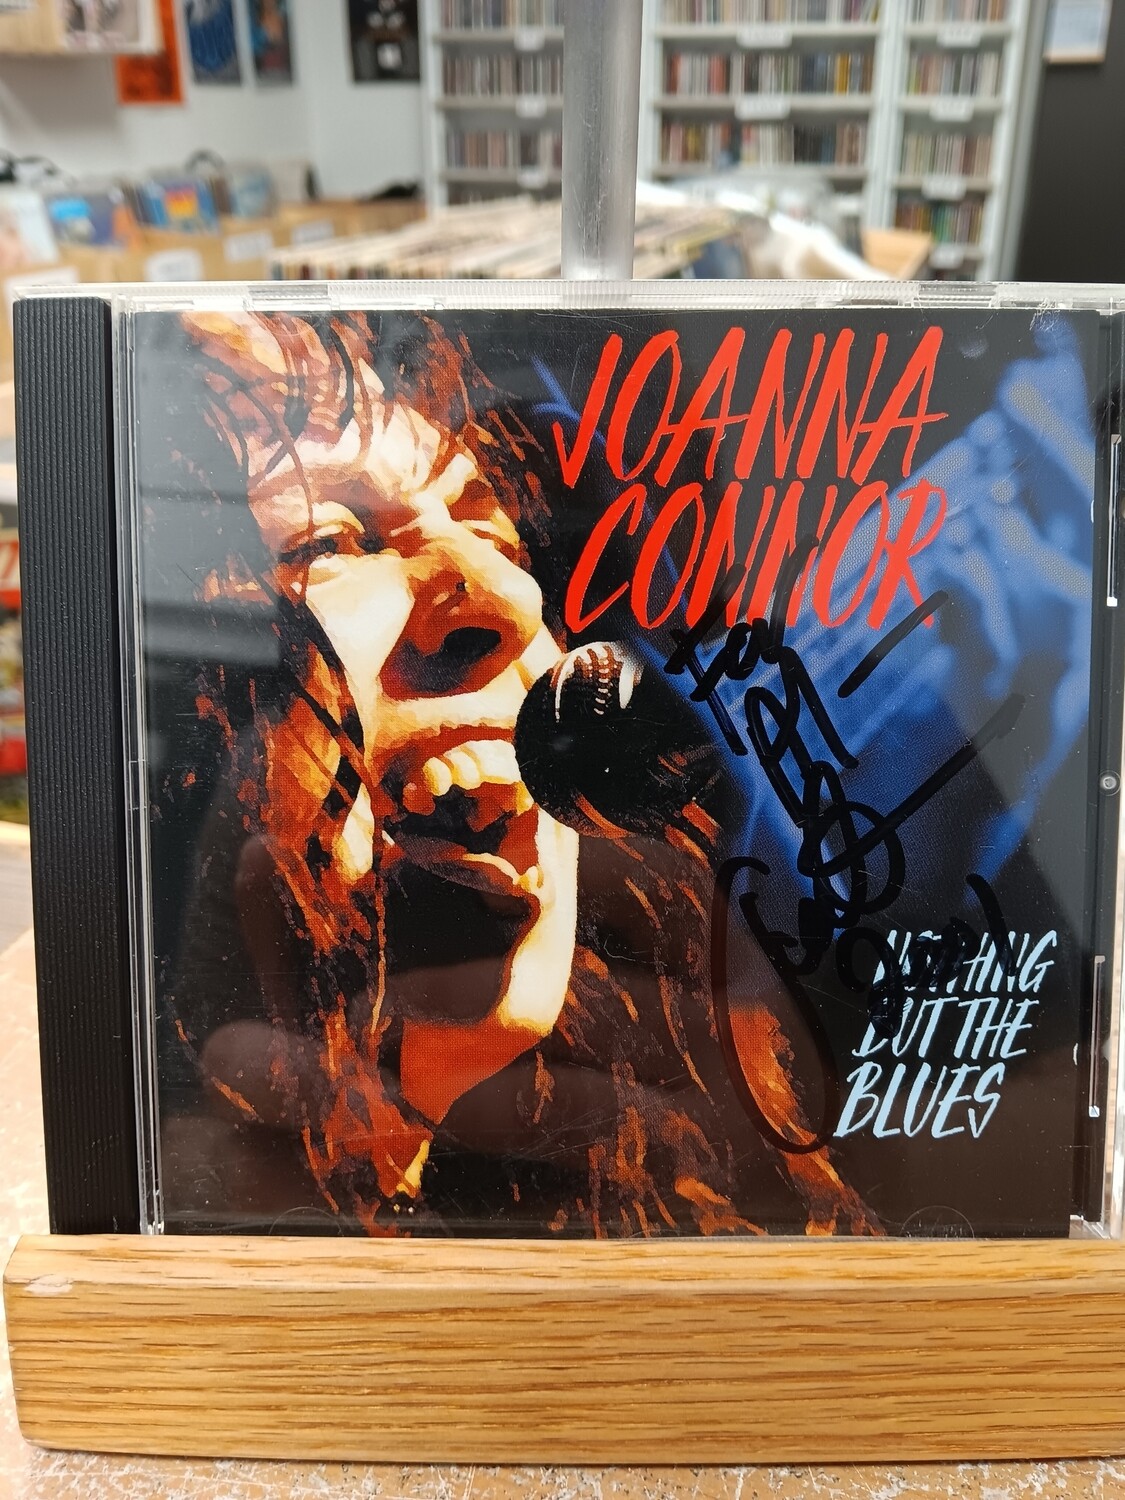 Joanna Connor - Nothing but the blues (CD)